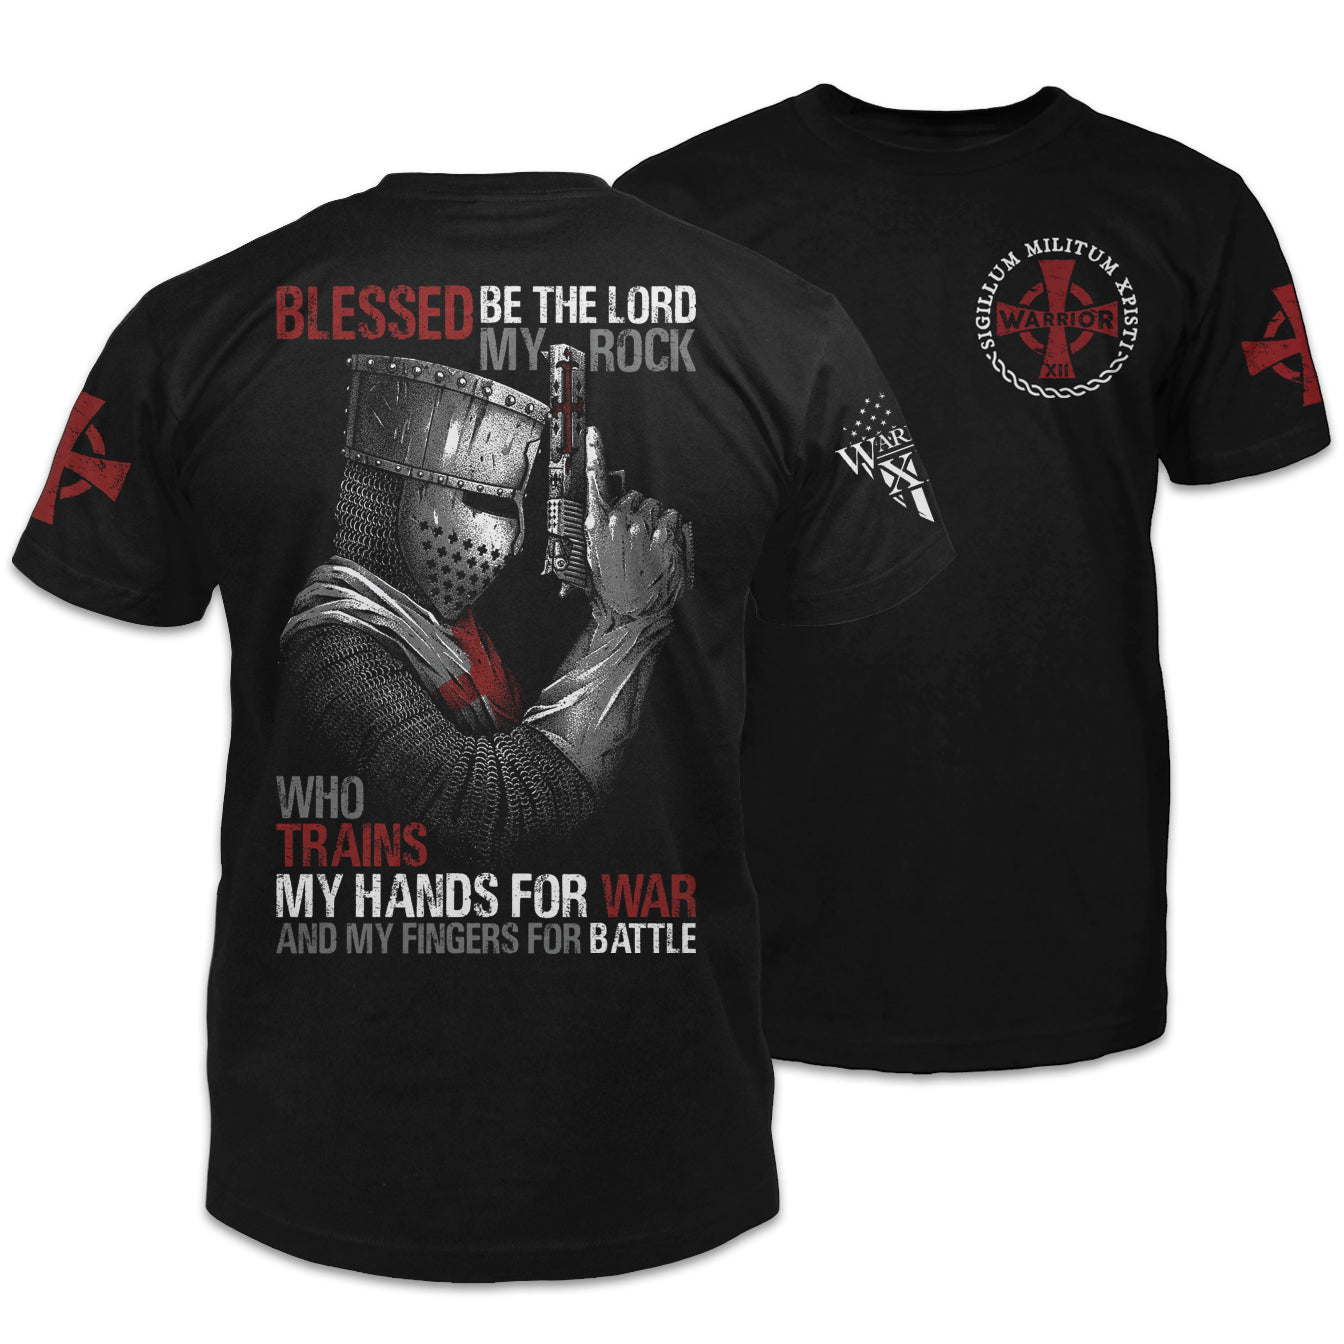 Front & back black t-shirt with the words "Blessed be the lord, my rock, who trains my hands for war and my fingers for battle" with a crusader holding a gun printed on the shirt.